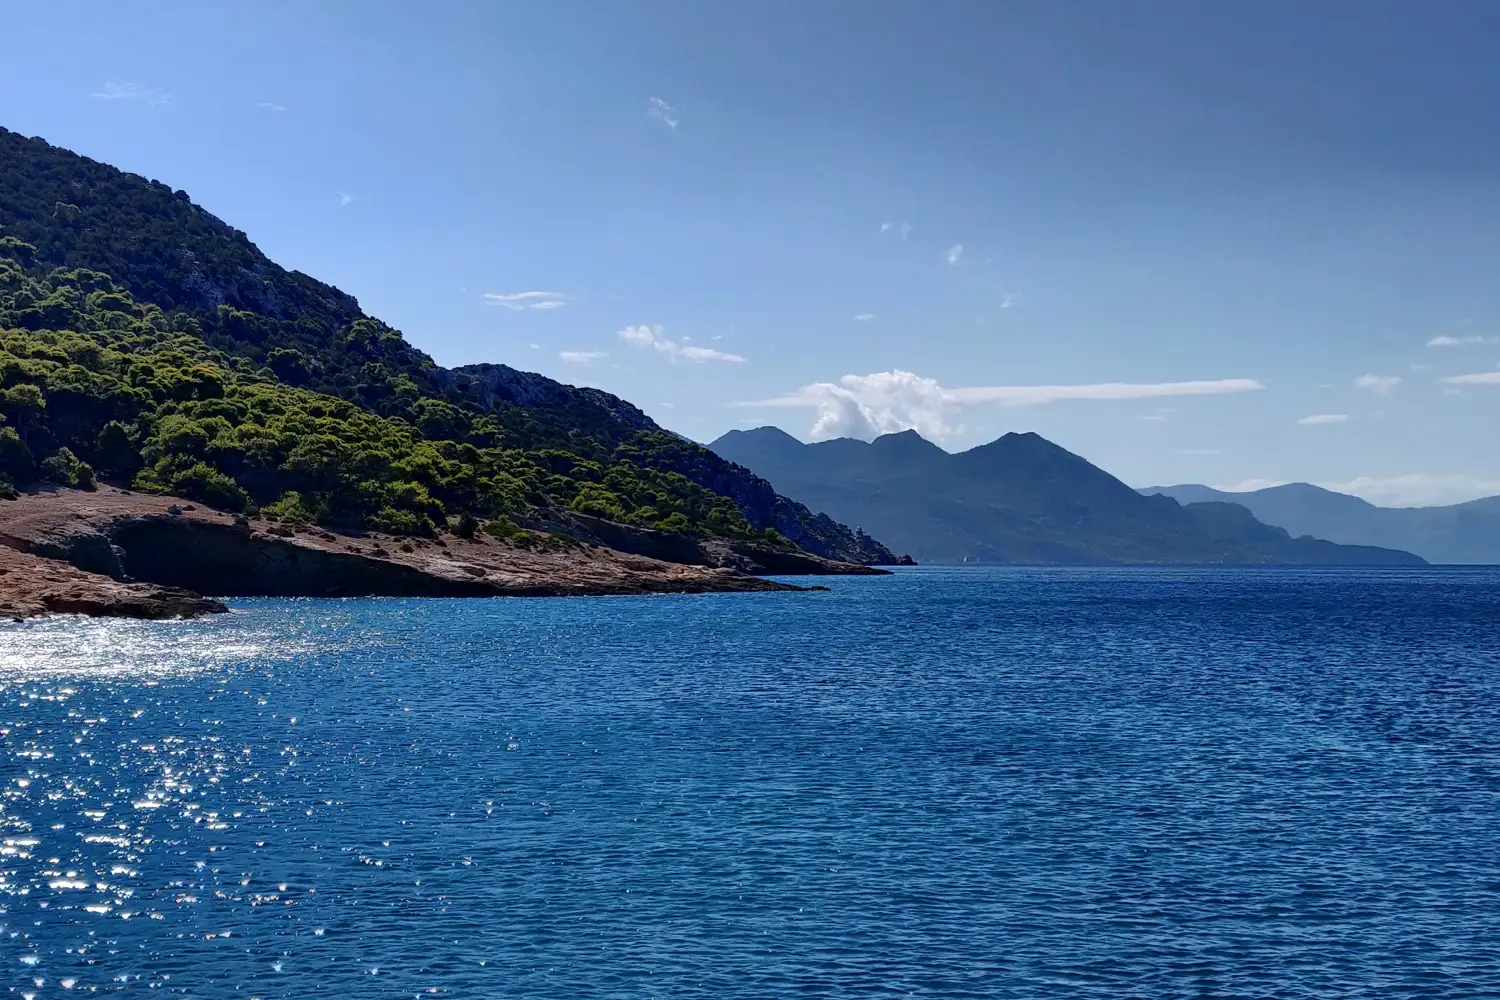 Ferry to Myli (Agistri) - Beautiful blue sea and lush vegetation on a cliff.